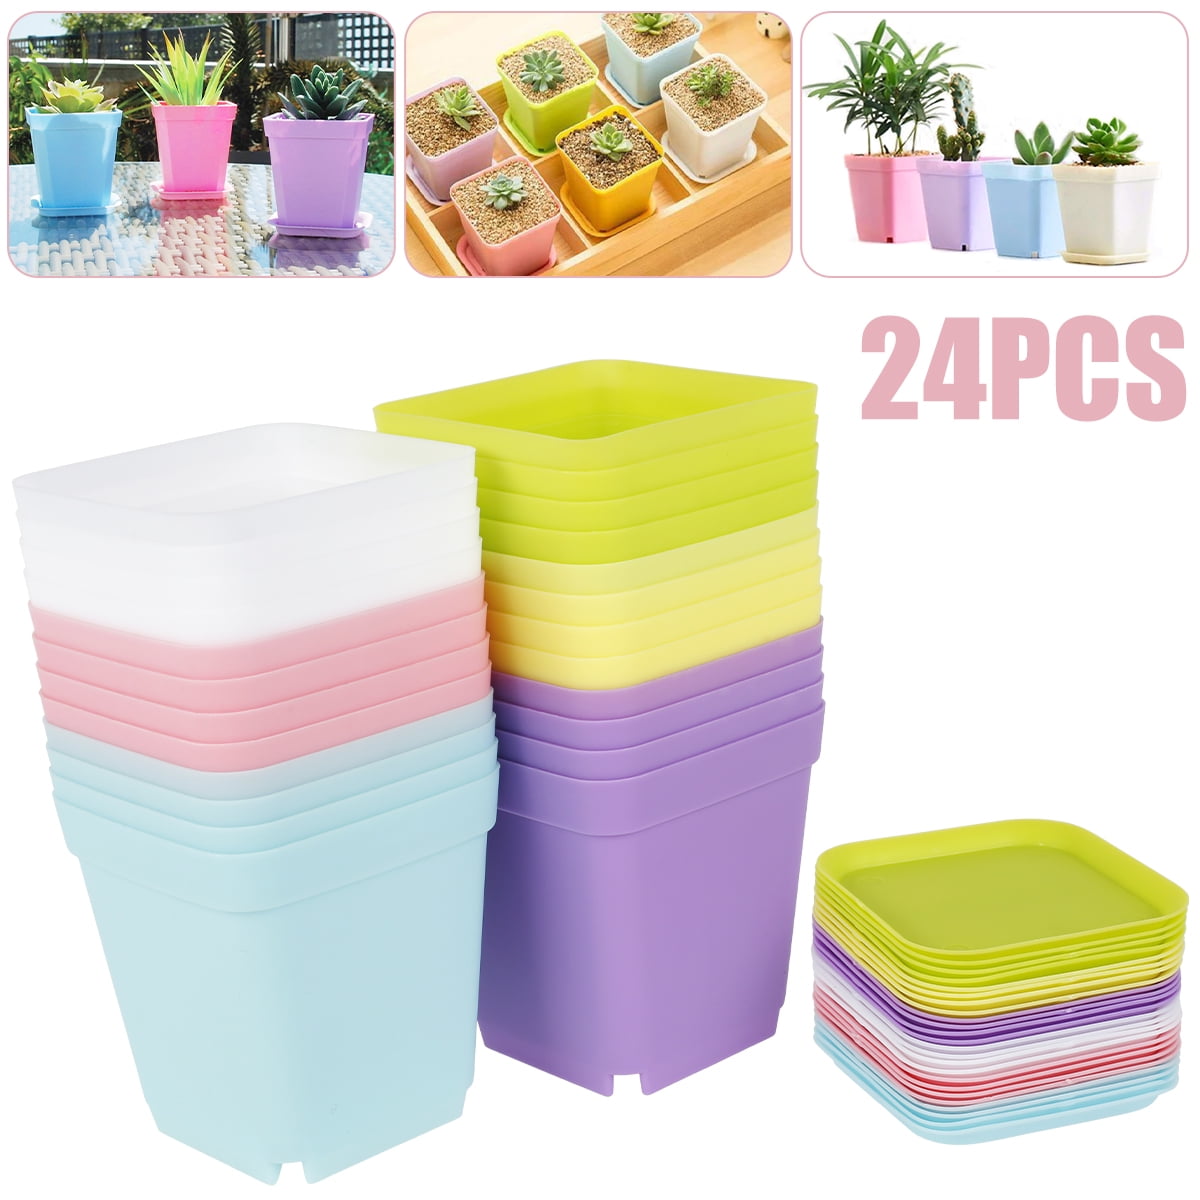 Duety 24pcs Plastic Pots with Pallet Square Flower Colorful Flower Nursery Seedling Pots Outdoor Planter Container for Room Office Garden Decor - Walmart.com